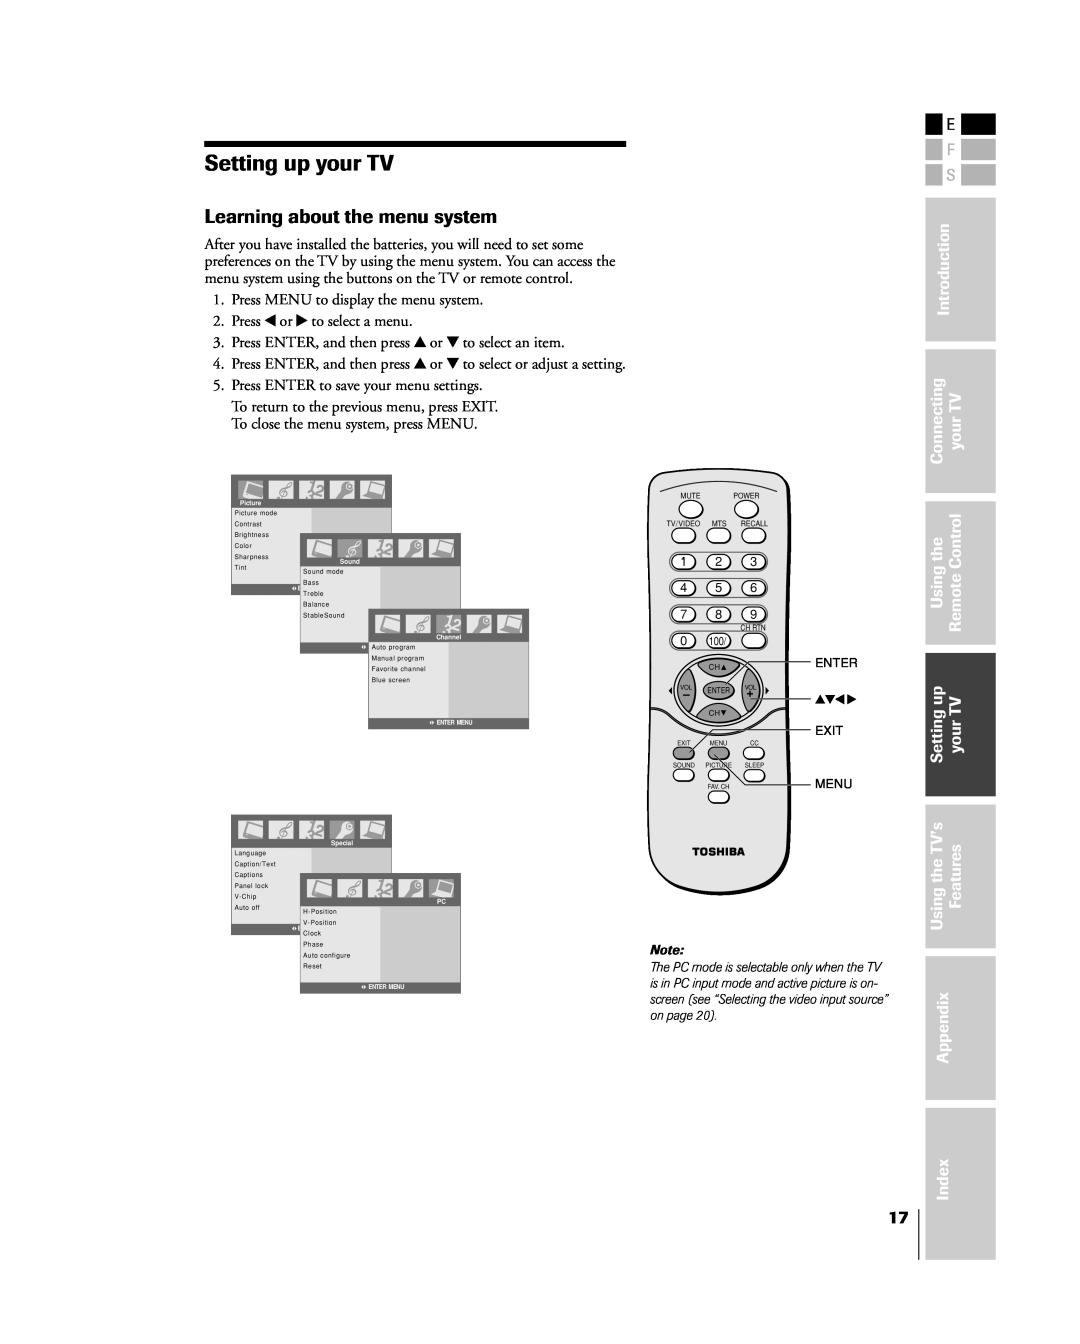 Toshiba 15DL15 Setting up your TV, Learning about the menu system, Introduction, Connecting yourTV, Usingthe, Settingup 